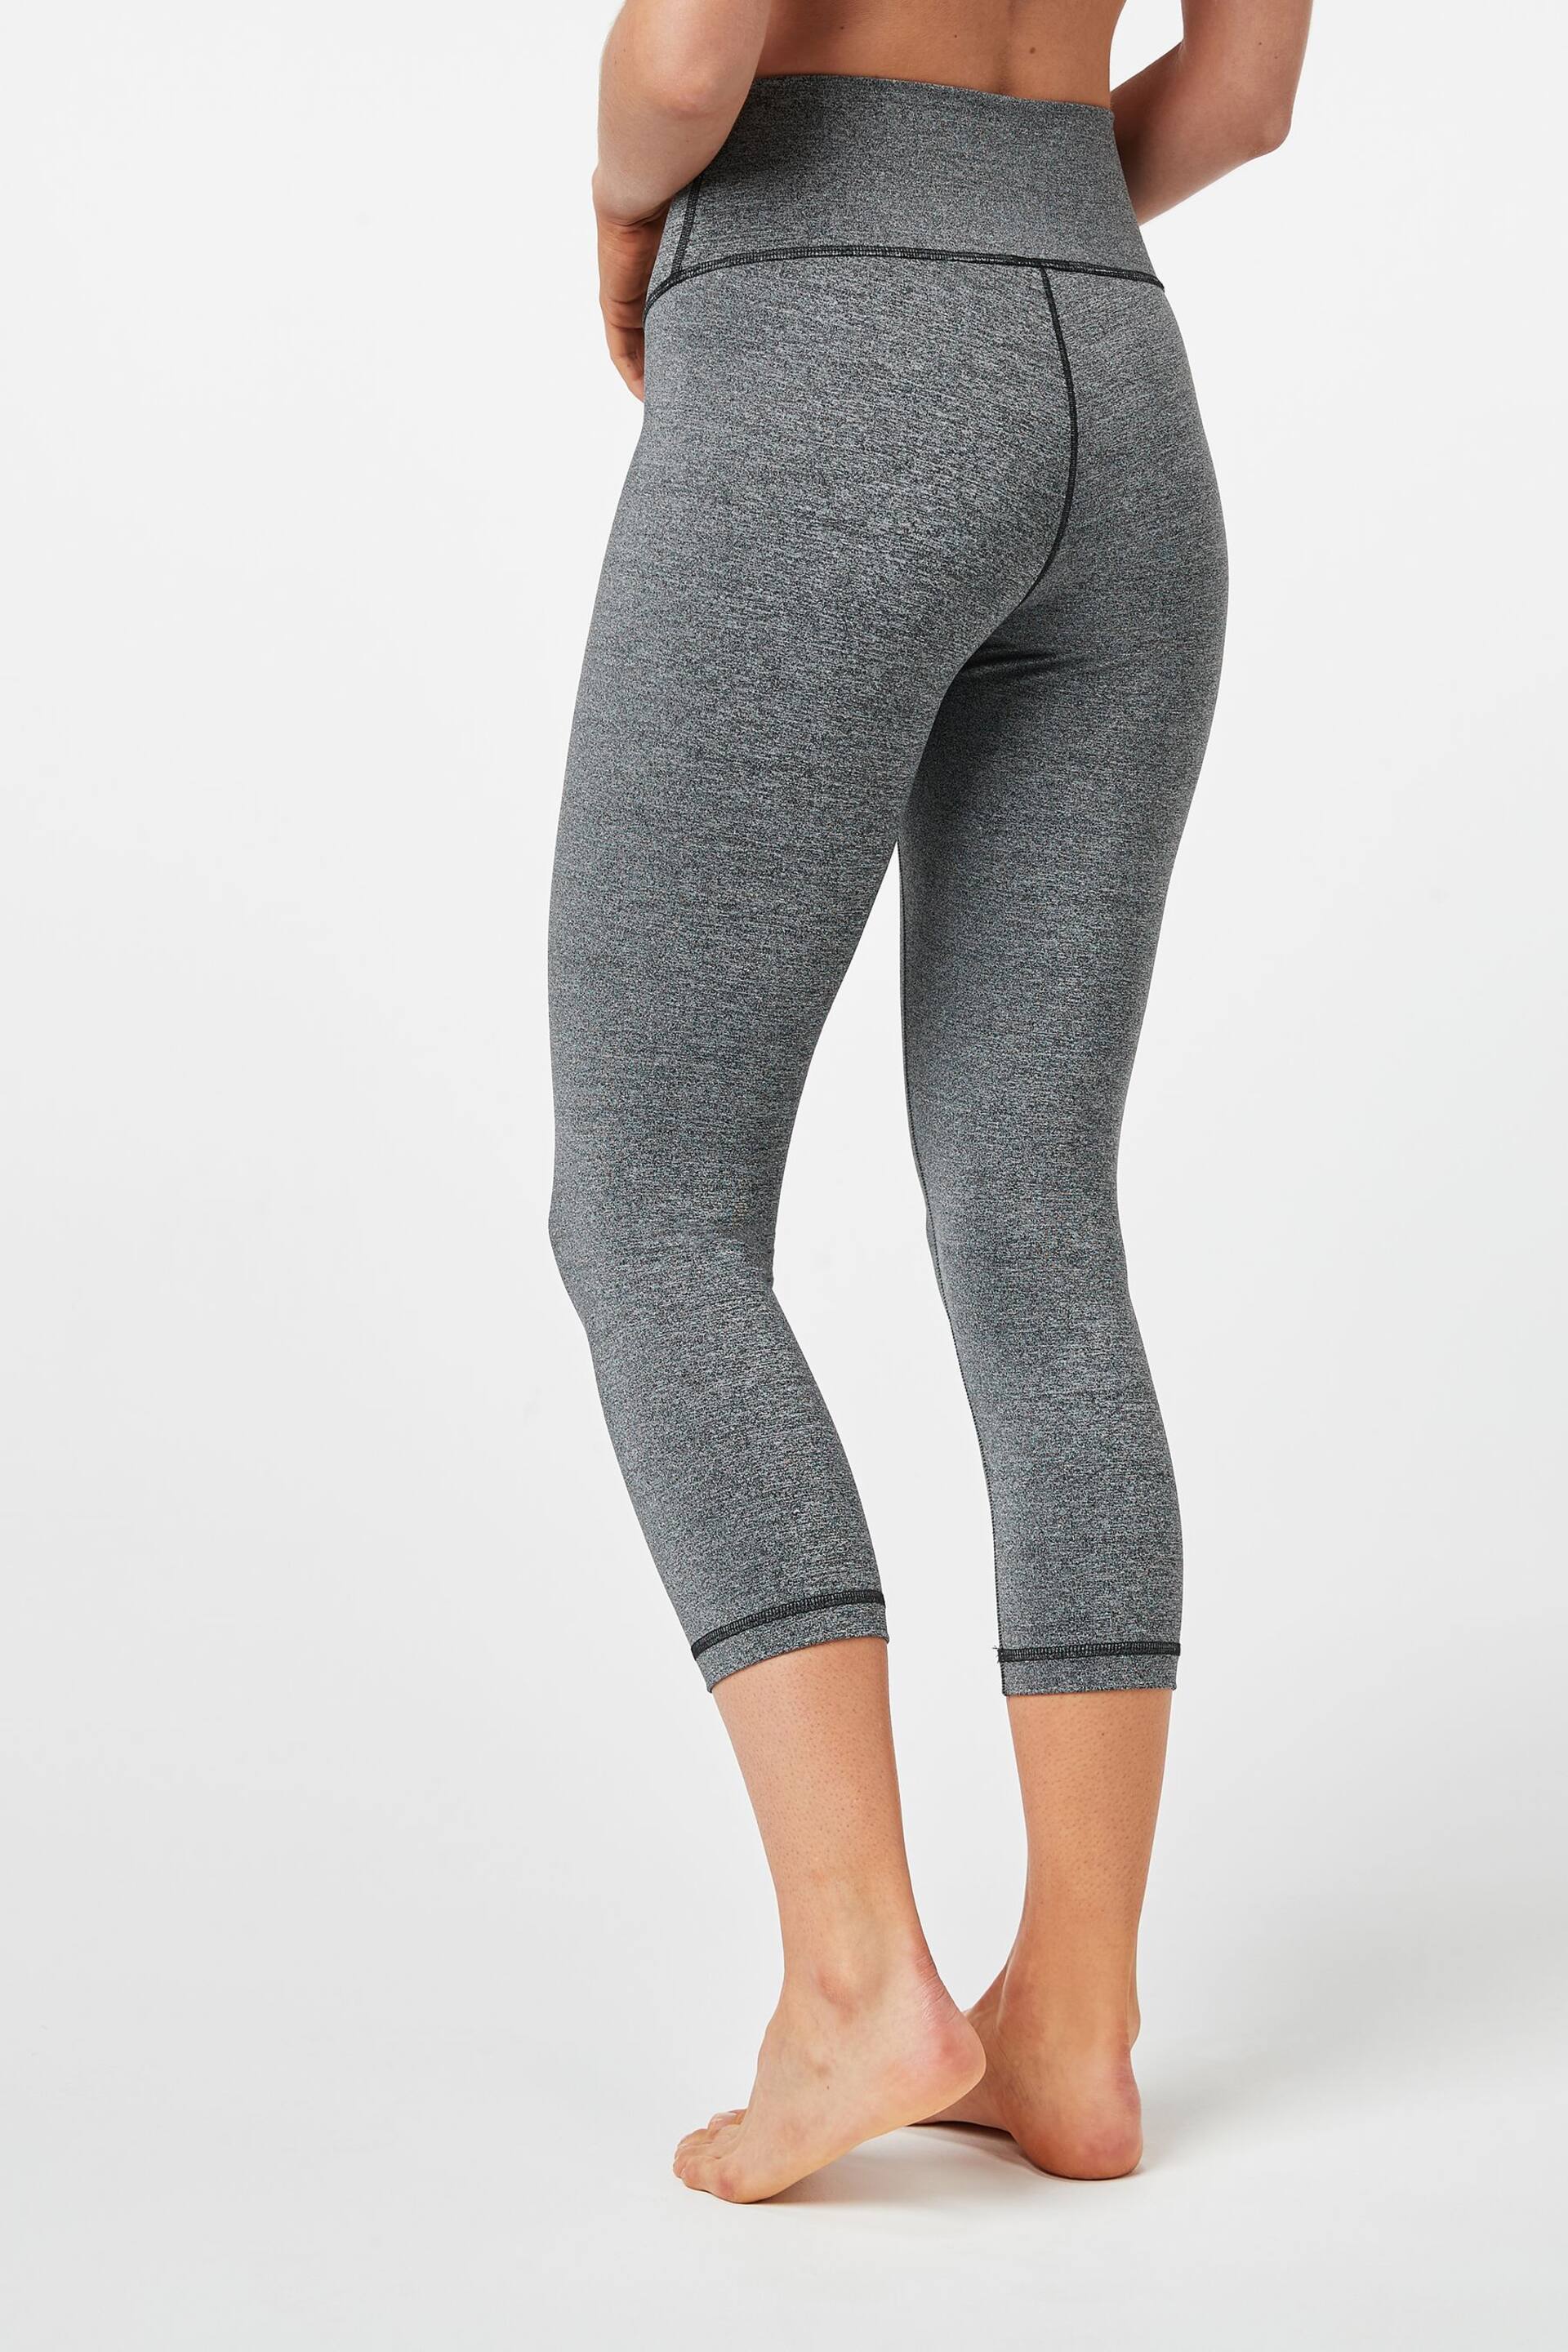 Grey Next Active Sports High Waisted Cropped Sculpting Leggings - Image 2 of 6